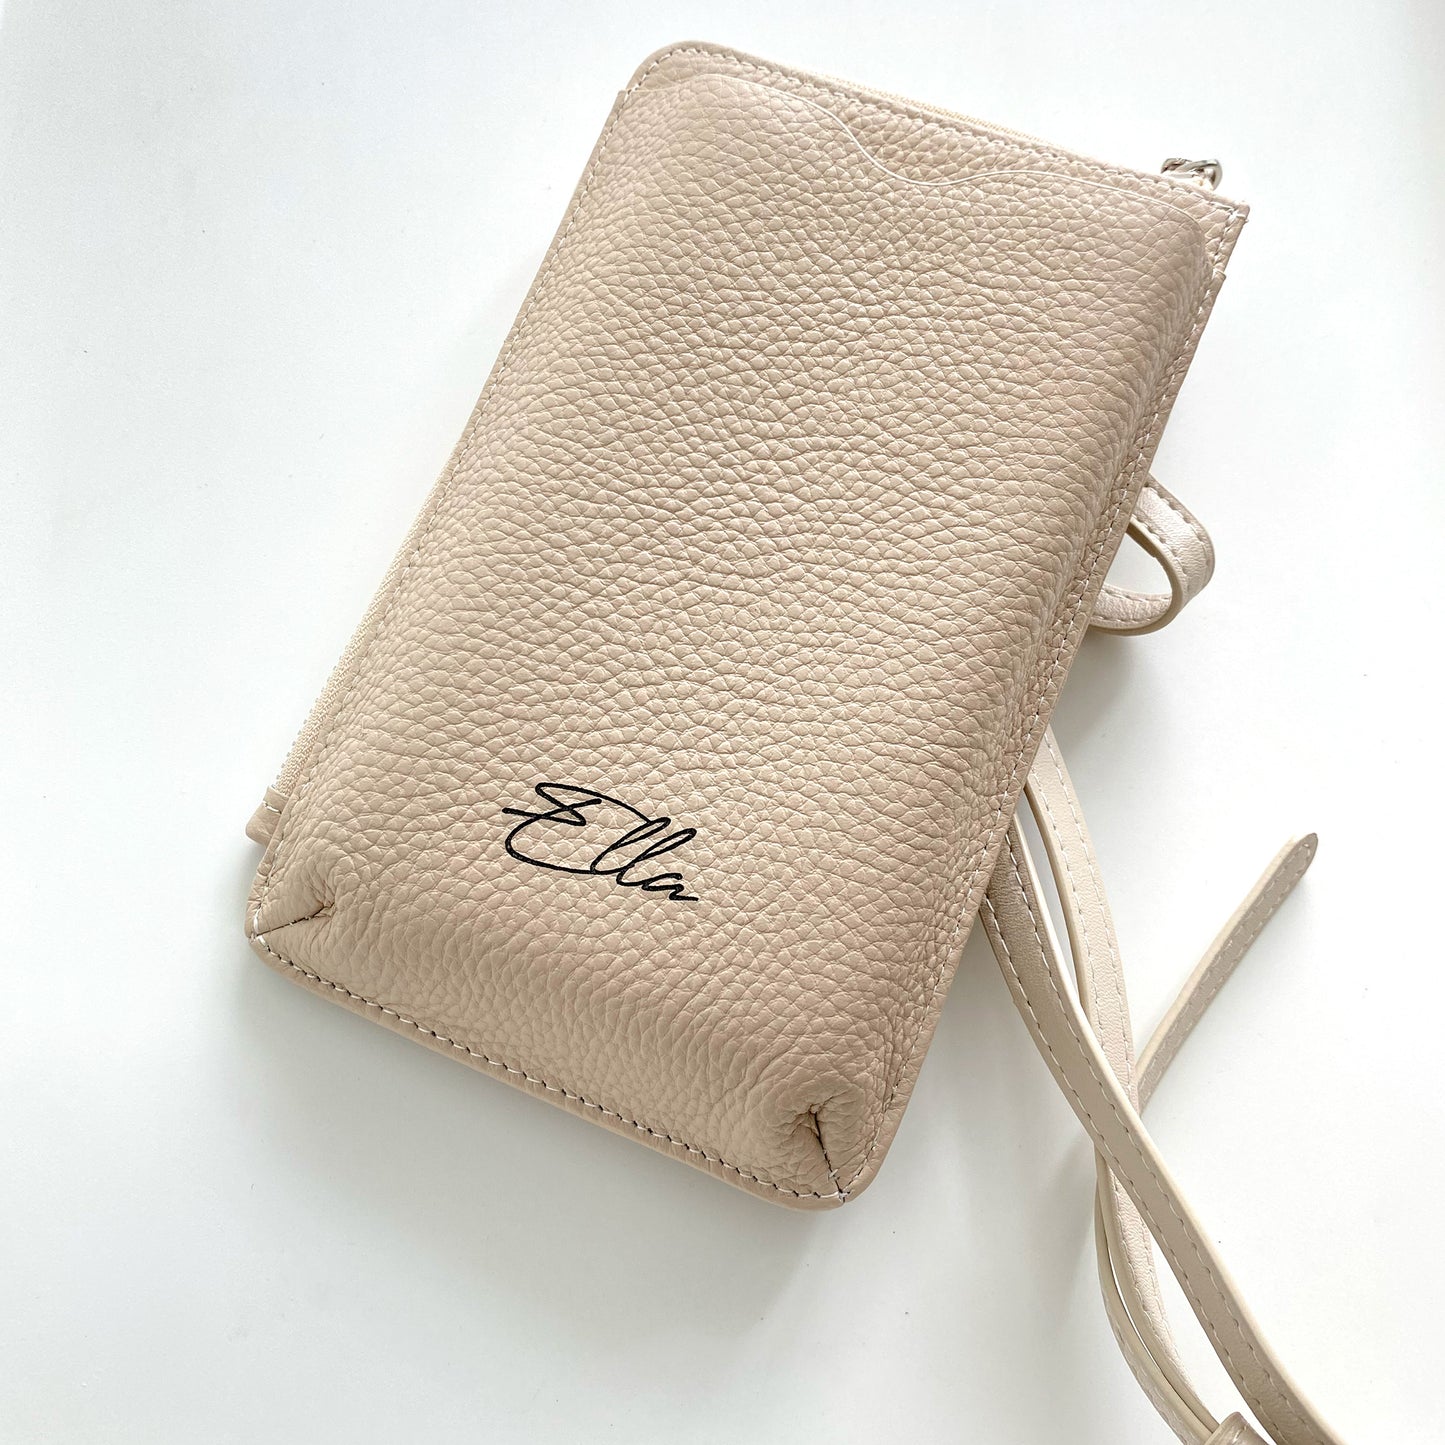 Minimal Mobile Phone Leather Sling Pouch